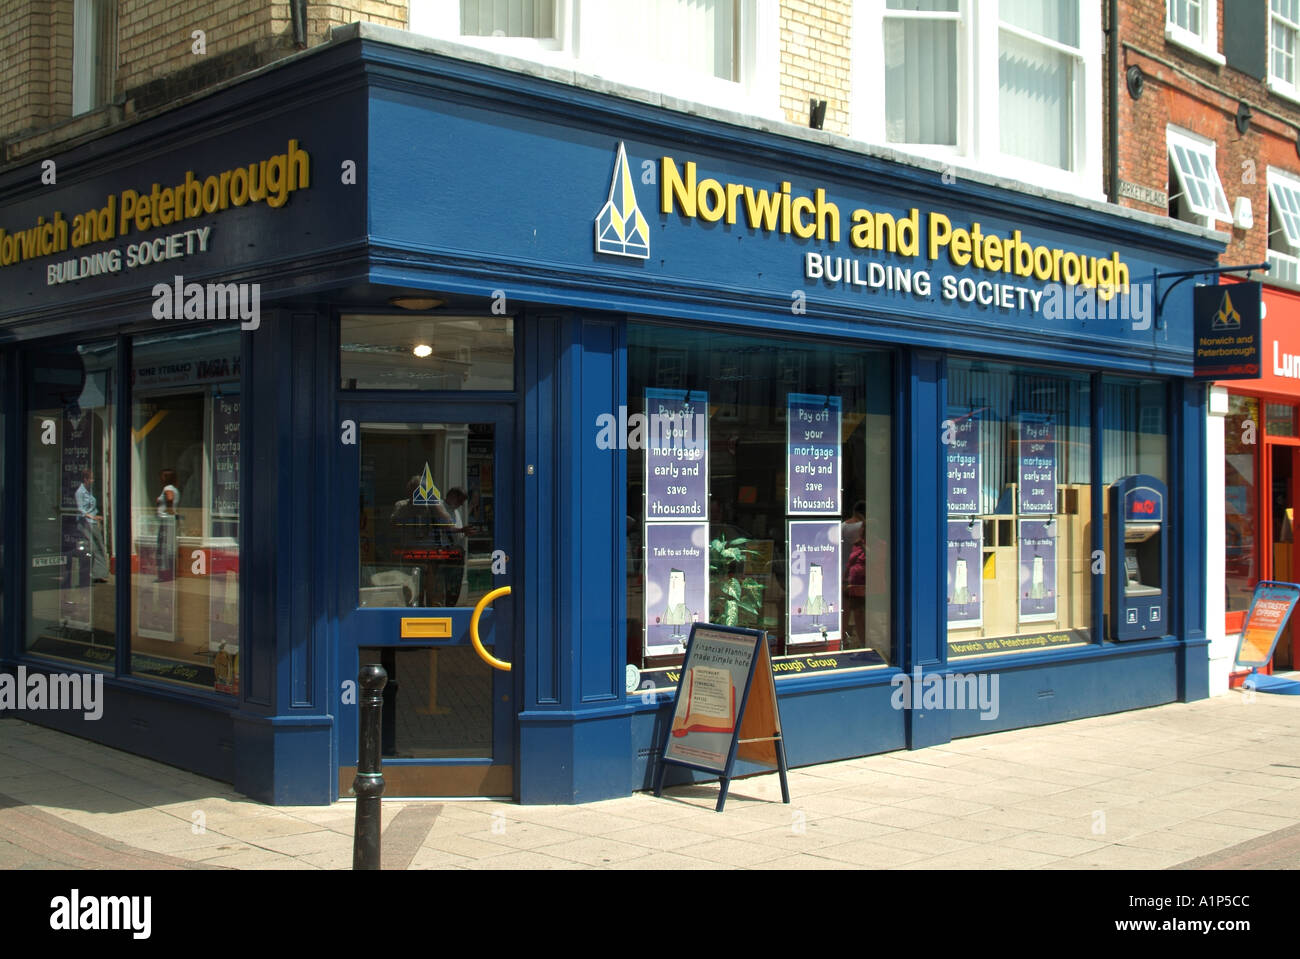 Wisbech Market Place Norwich Peterborough building society branch office Stock Photo